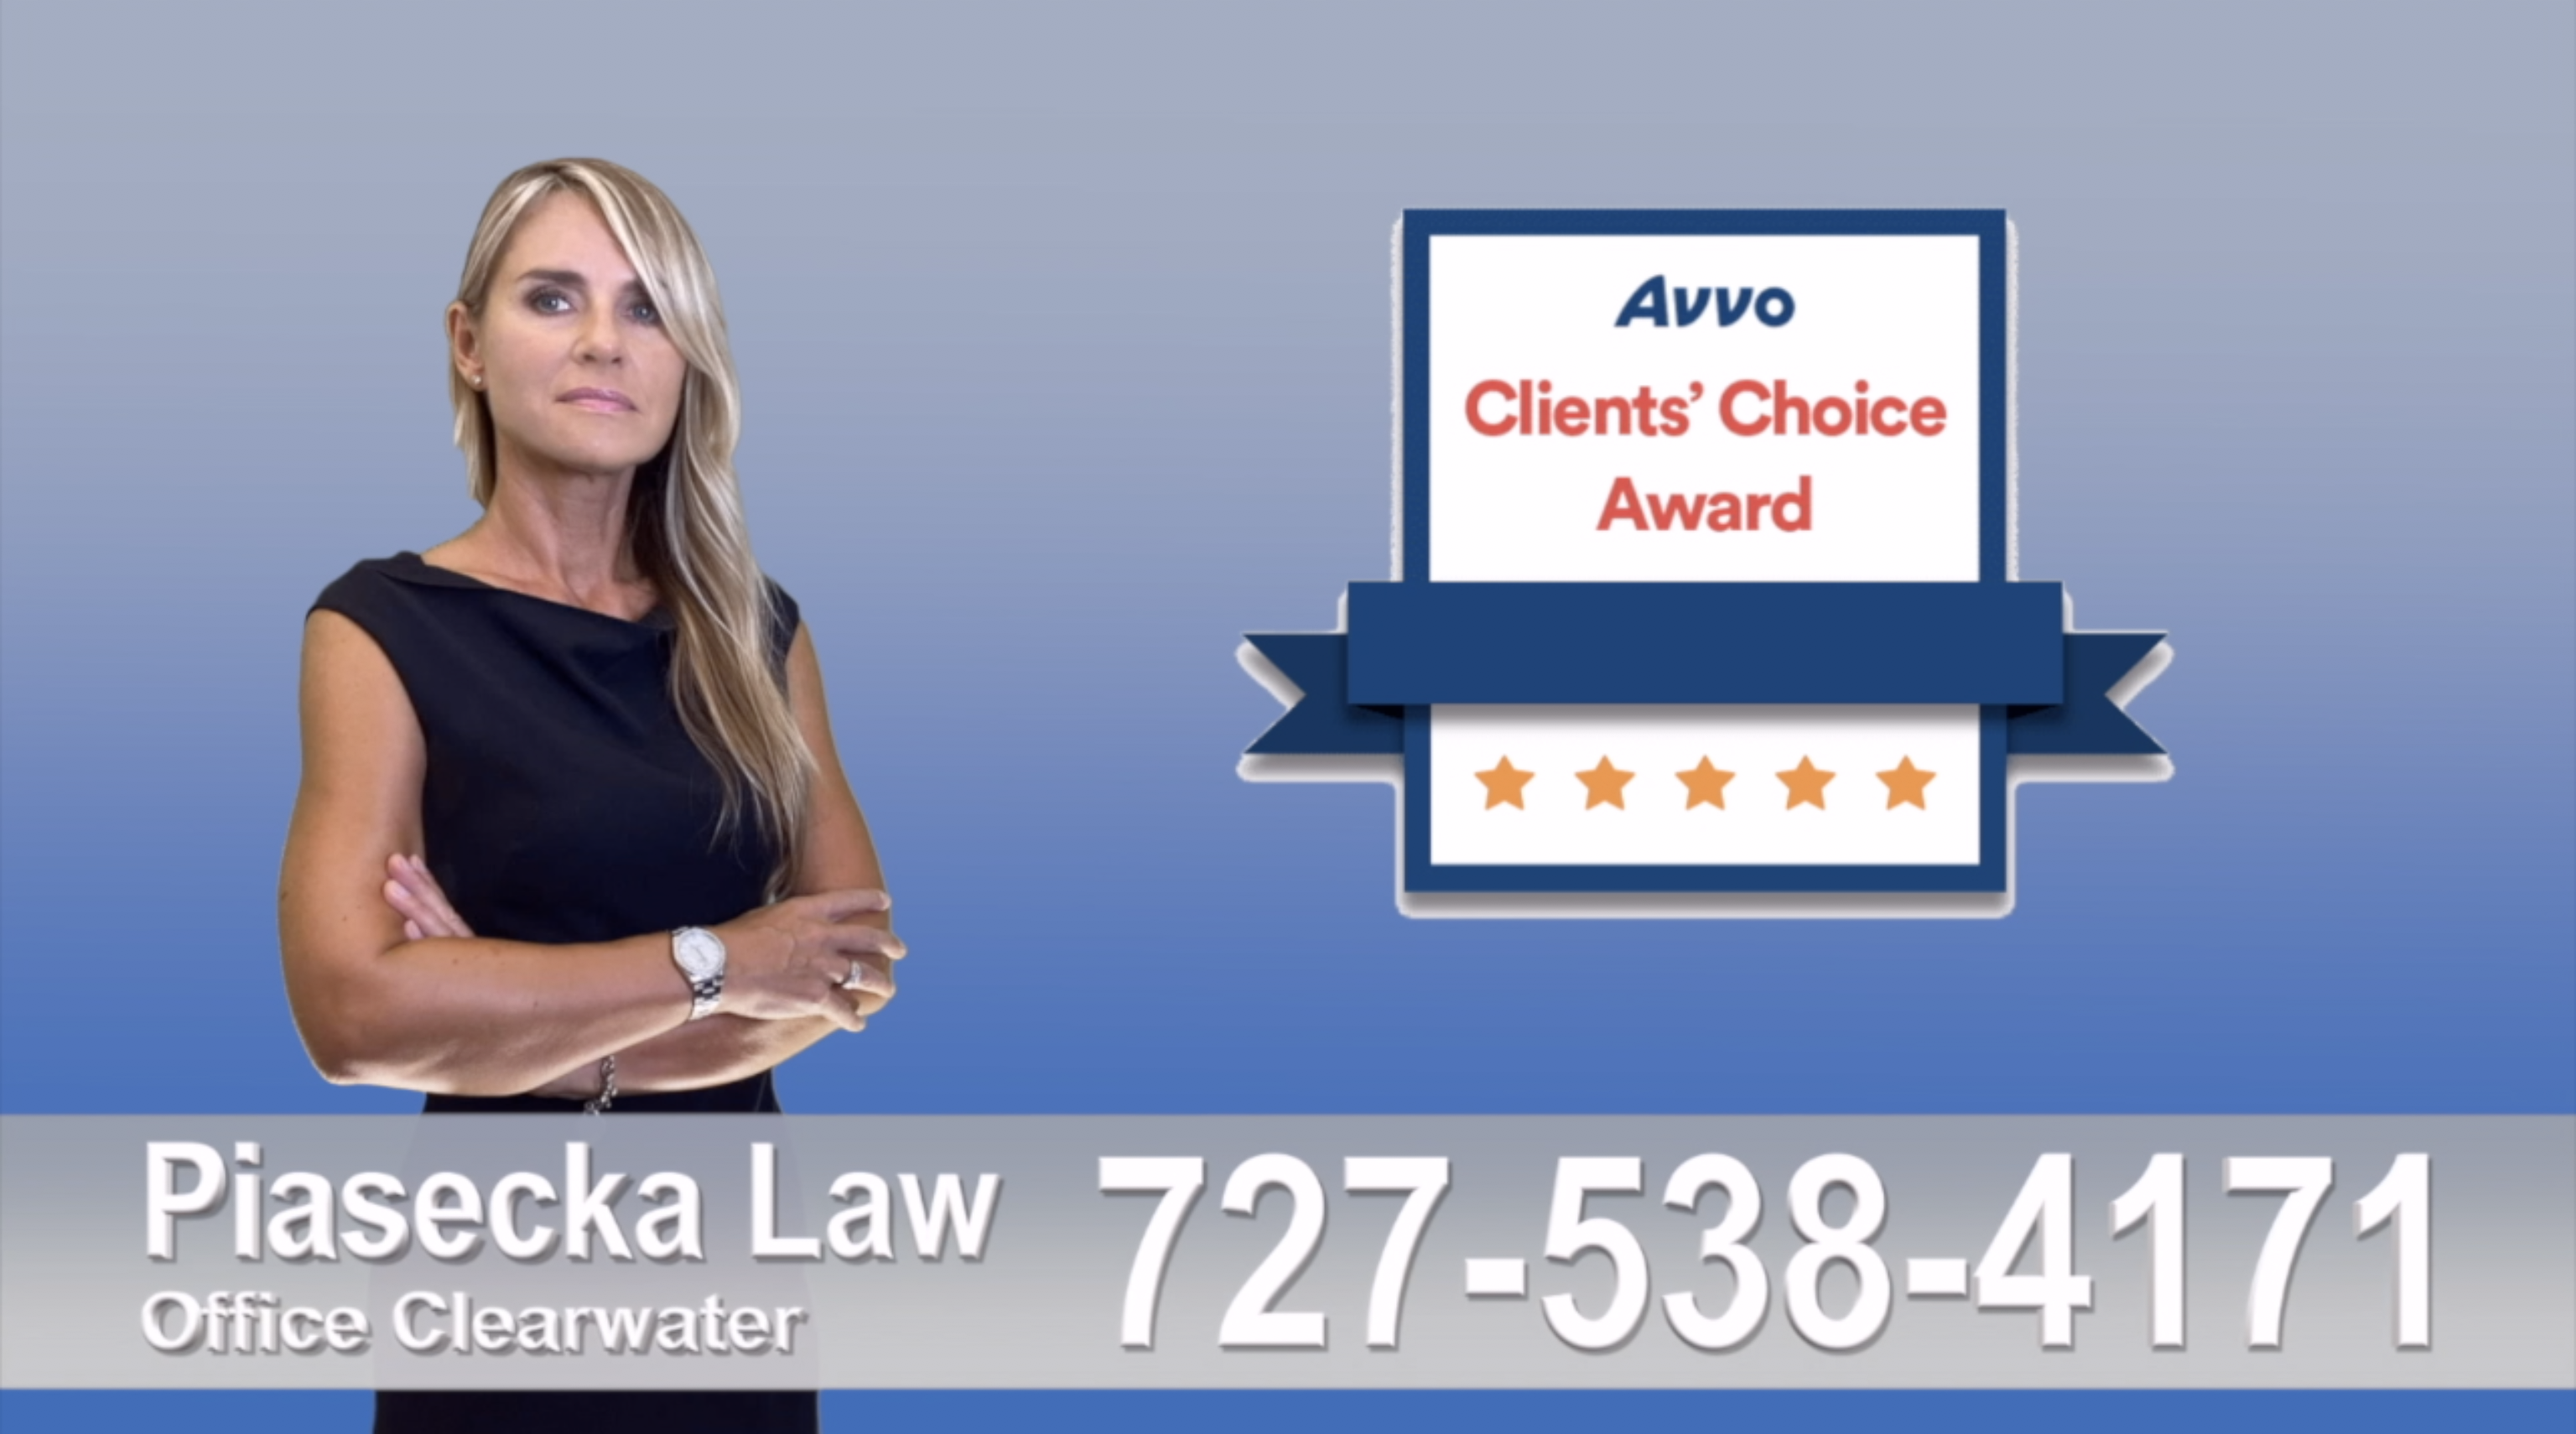  Immigration Sarasota, Immigration Polish, attorney, polish, lawyer, clients reviews, clients' choice avvo award